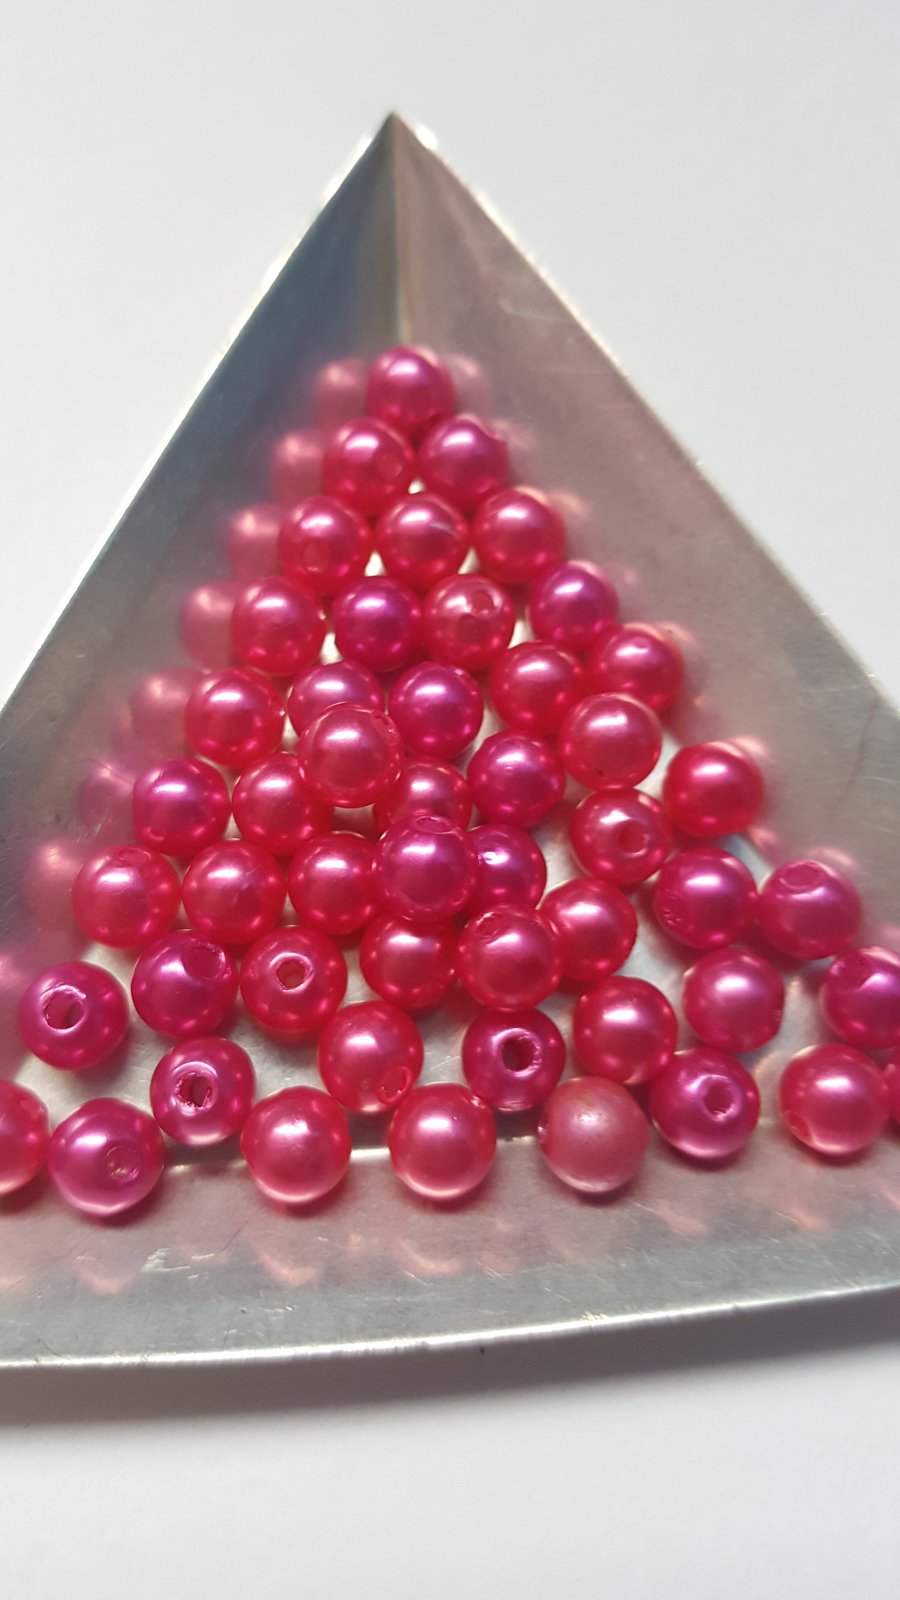 50 x Acrylic Pearl Beads - Round - 6mm - Bright Pinks Mix